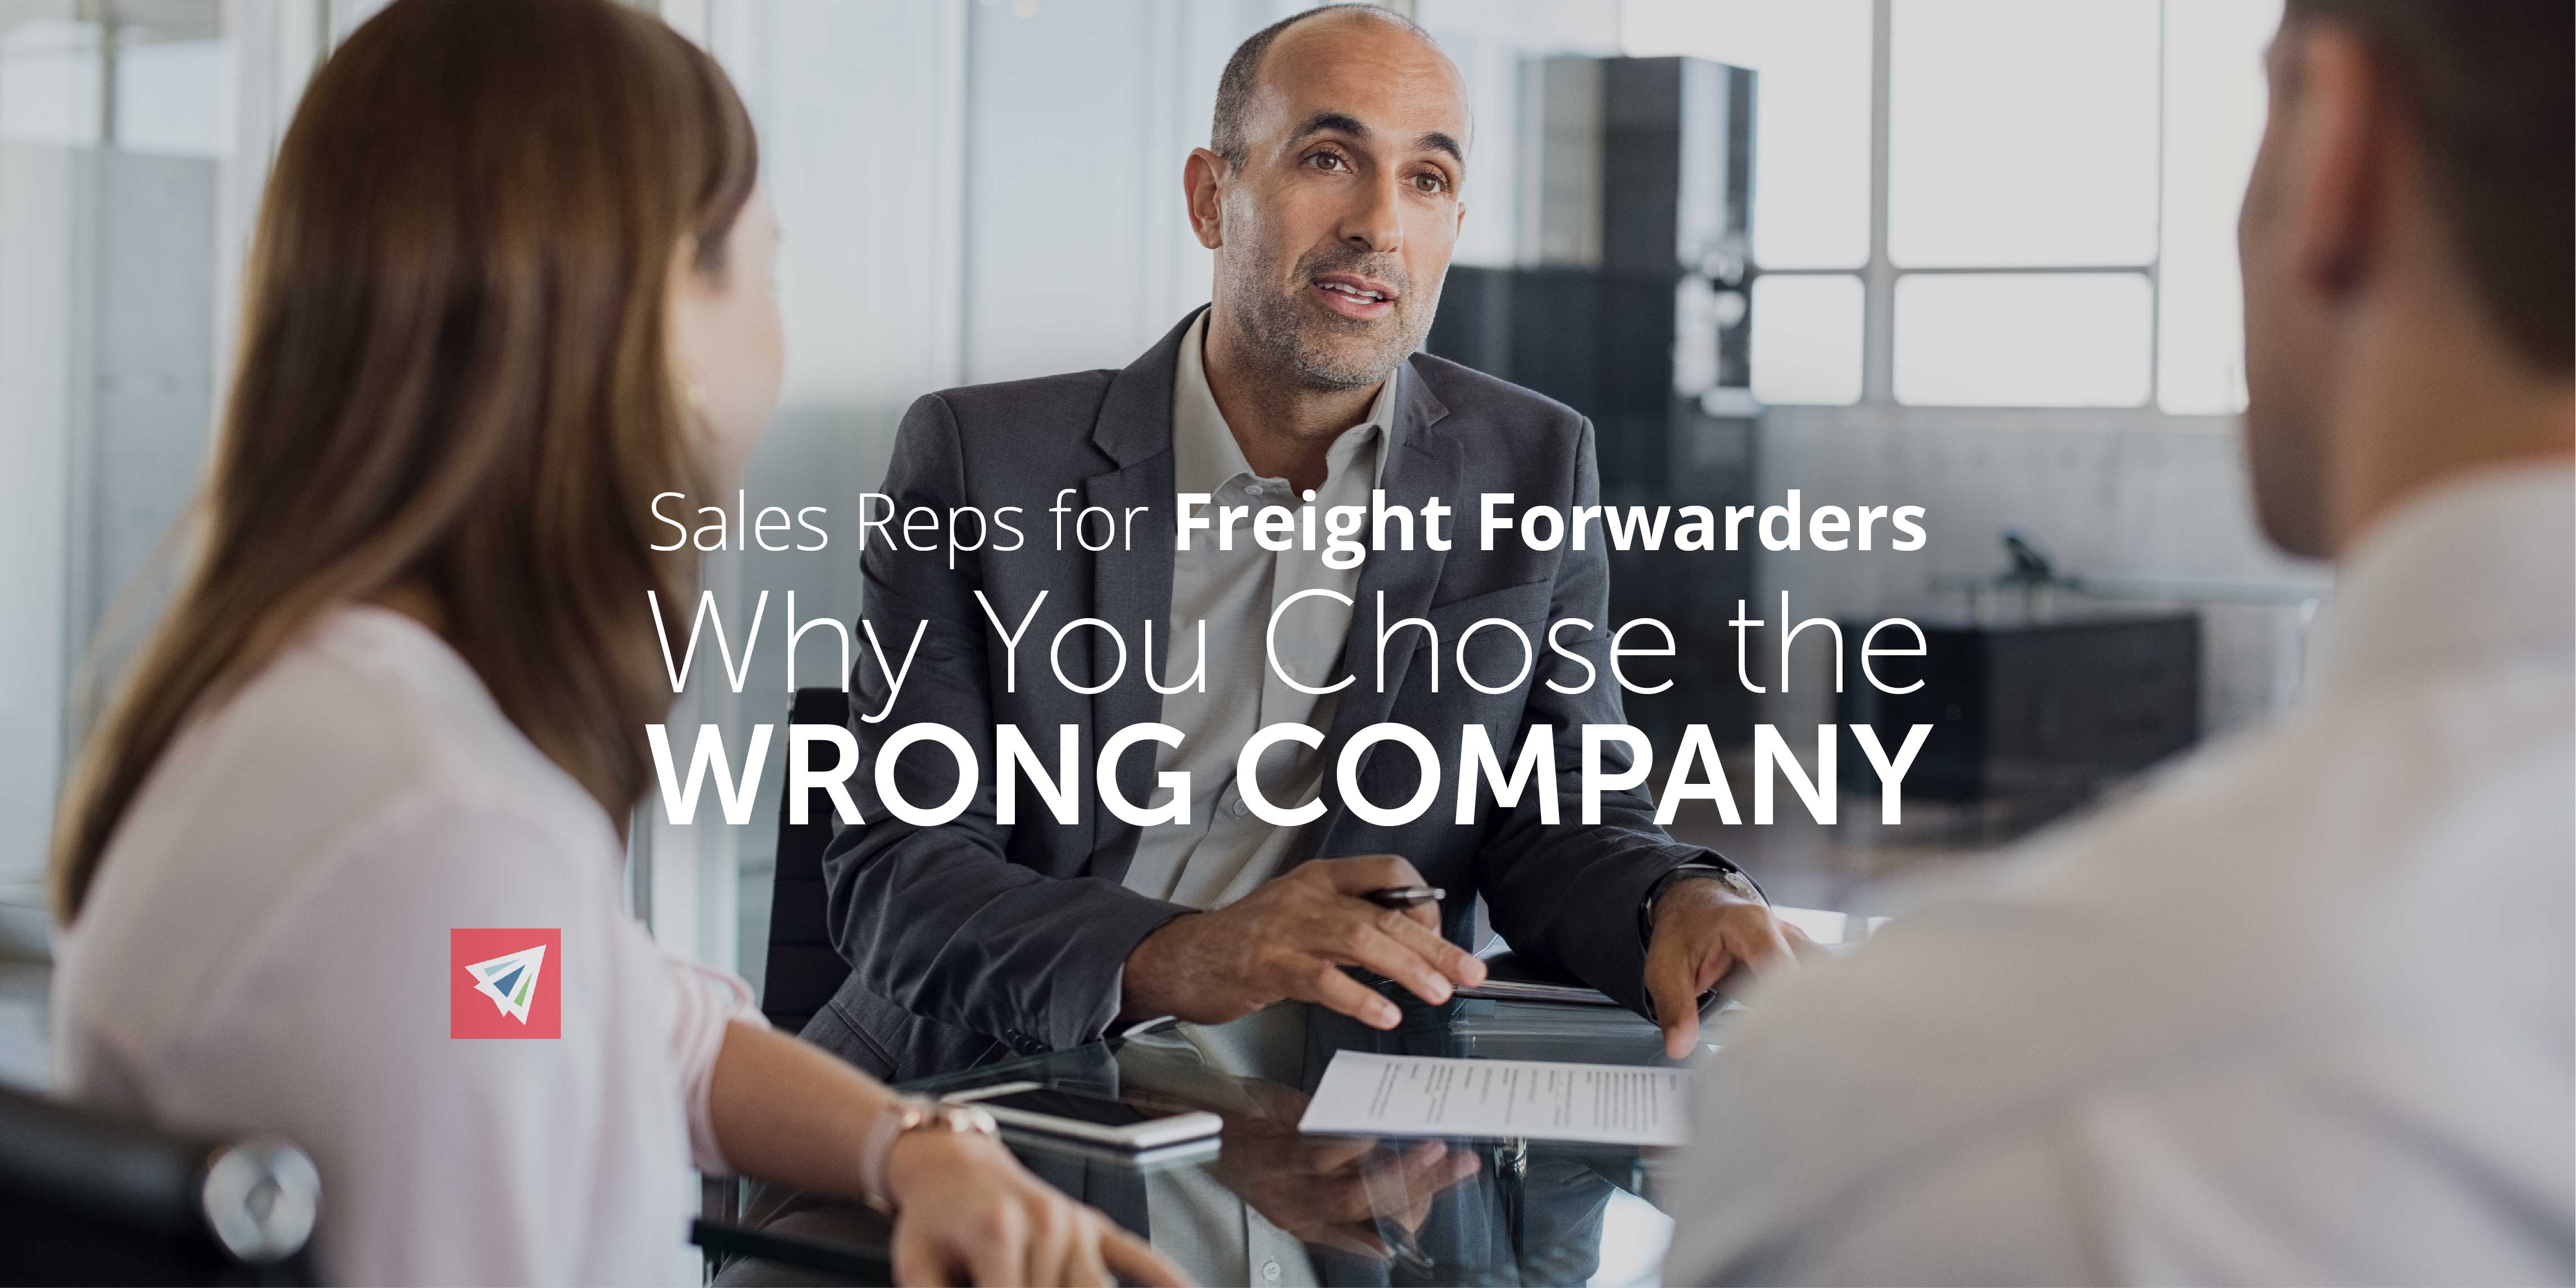 Sales Reps for Freight Forwarders: Why You Chose the Wrong Company